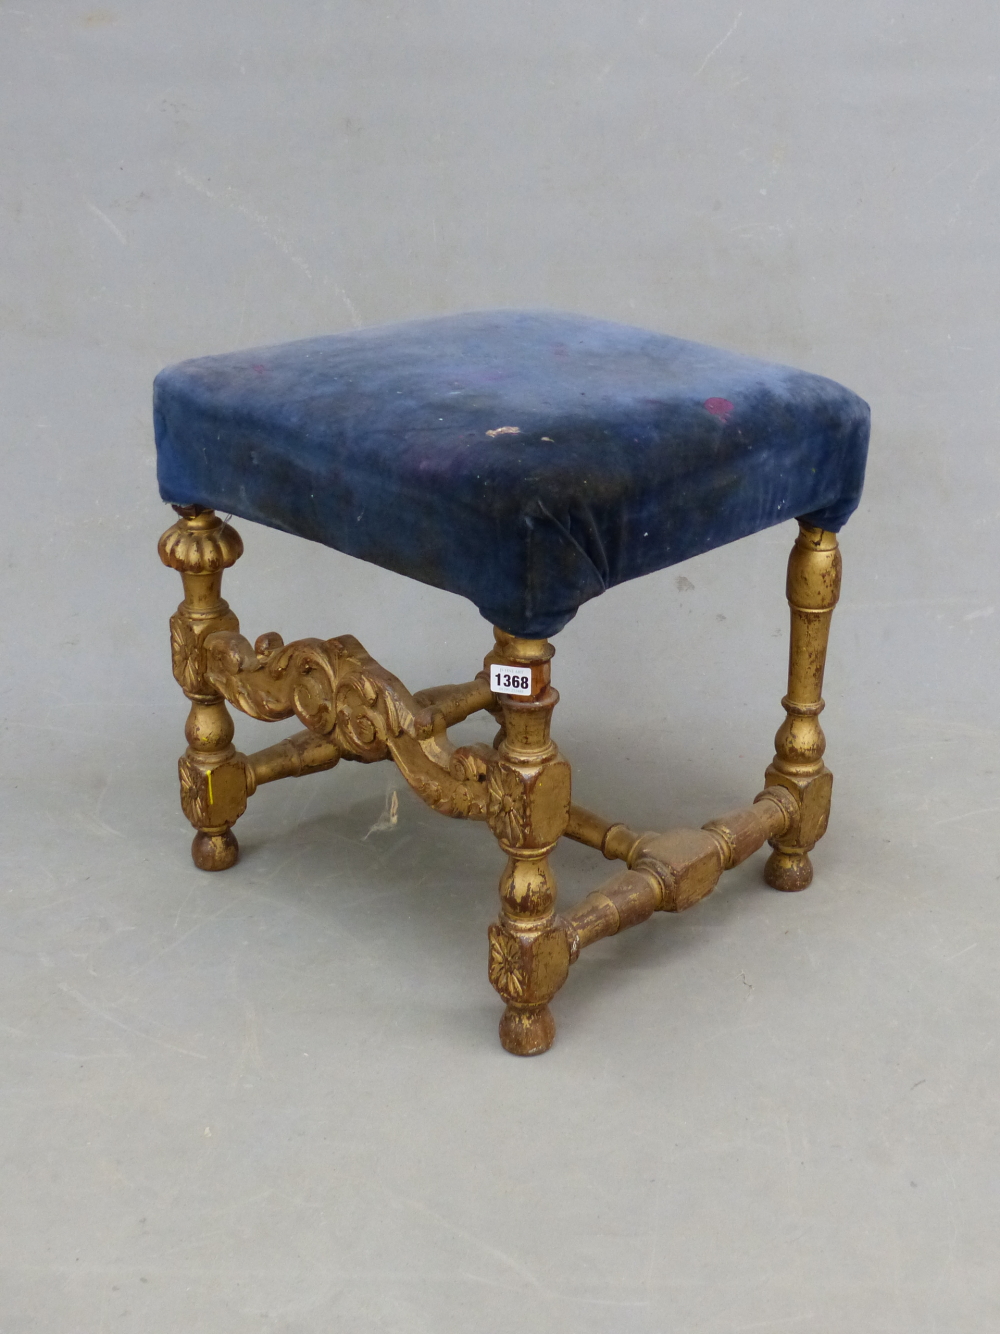 A PARCEL GILT OAK STOOL, WITH BLUE VELVET SEAT ABOVE BALUSTER LEGS JOINED AT THE FRONT BY A